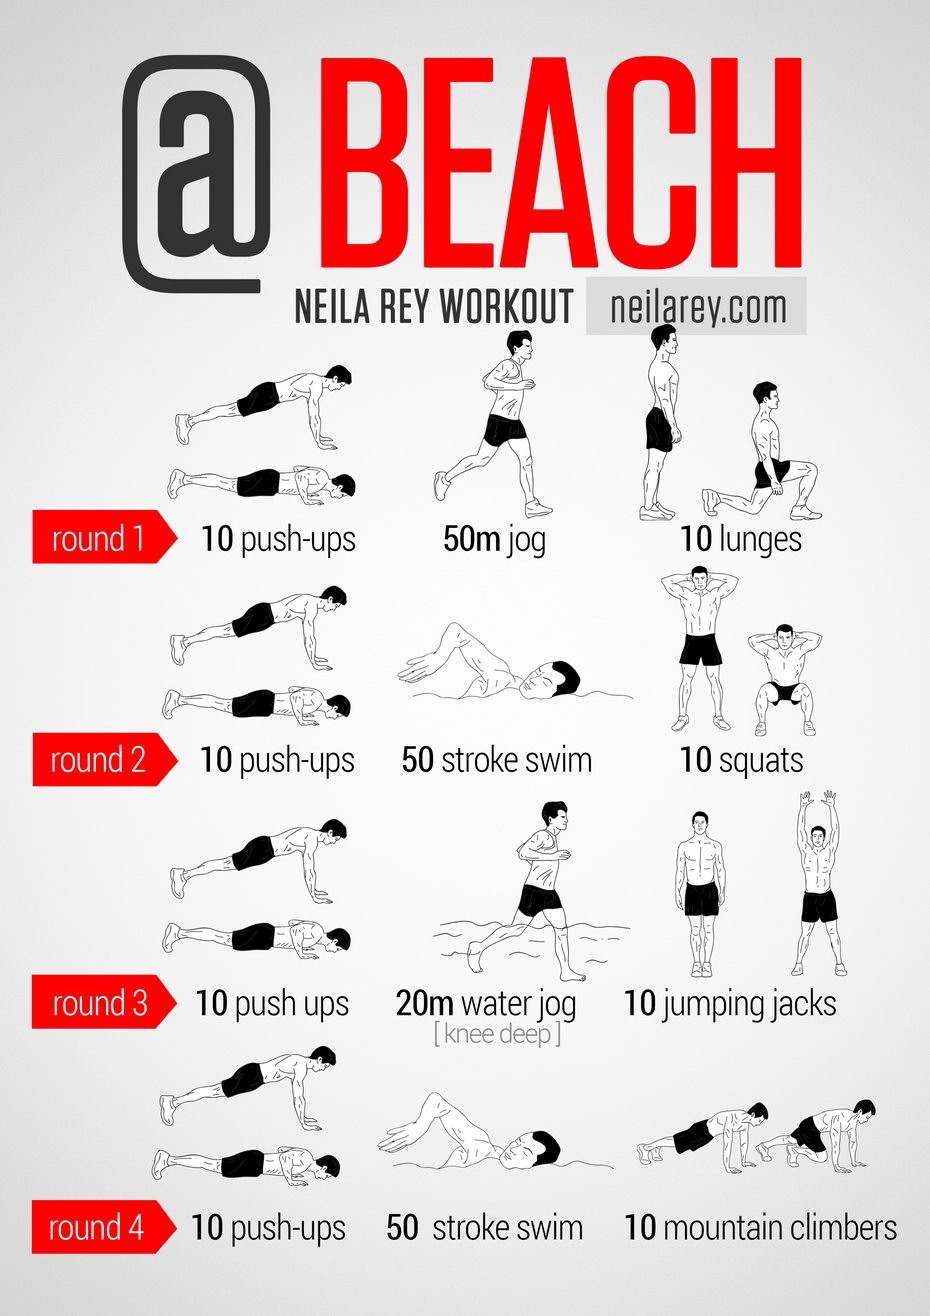 Visual Workout Guides for Full Bodyweight, No Equipment